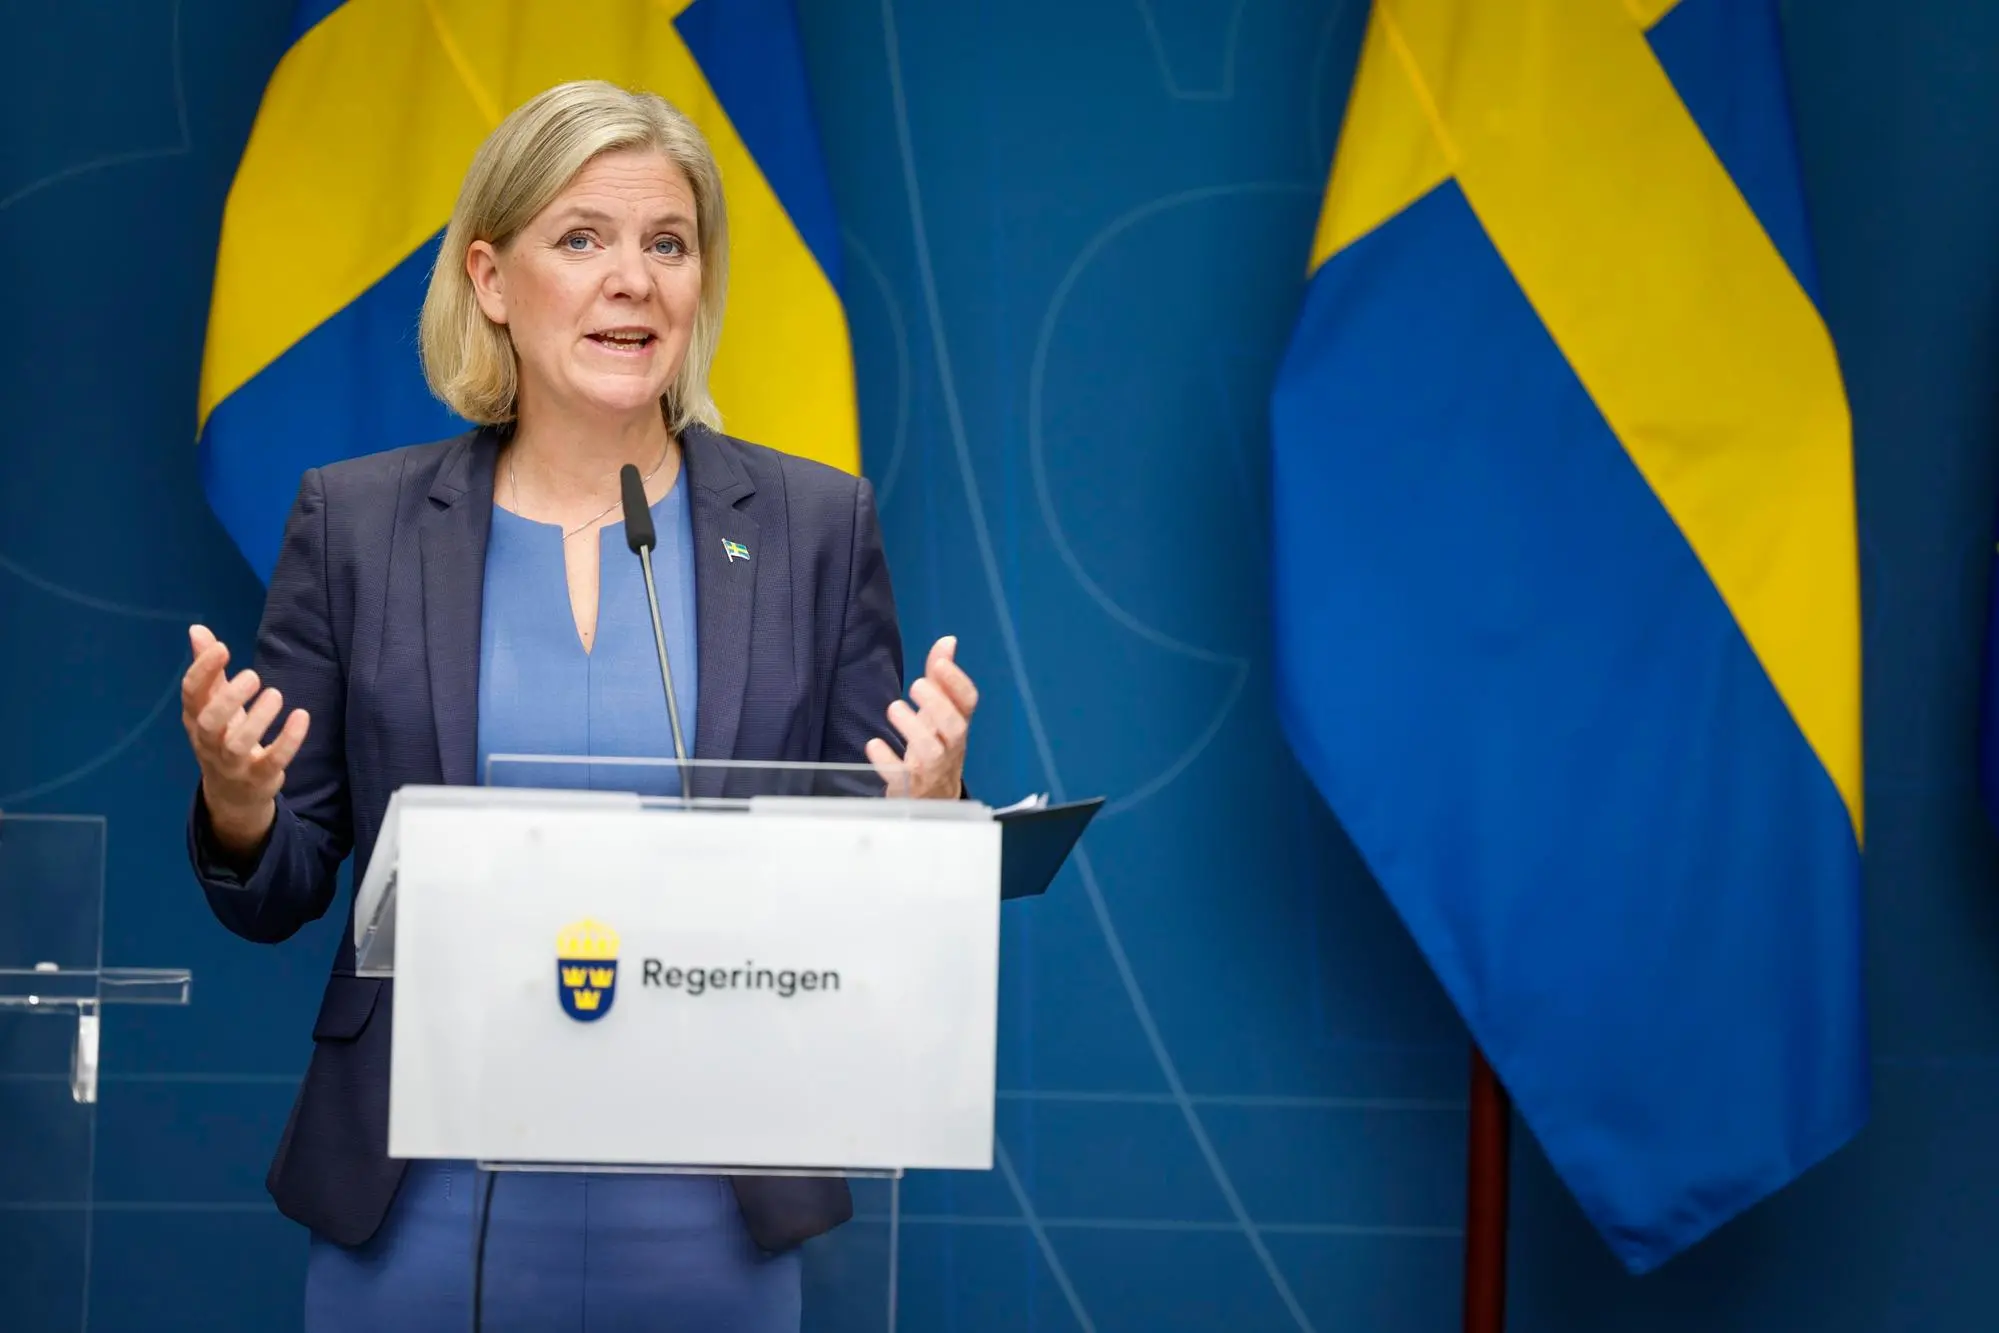 epa10184245 Sweden's Prime Minister Magdalena Andersson gives a news conference in Stockholm, Sweden, 14 September 2022. Andersson said she will resign, as final election results are near. Sweden held general elections on 11 September. EPA/JESSICA GOW SWEDEN OUT